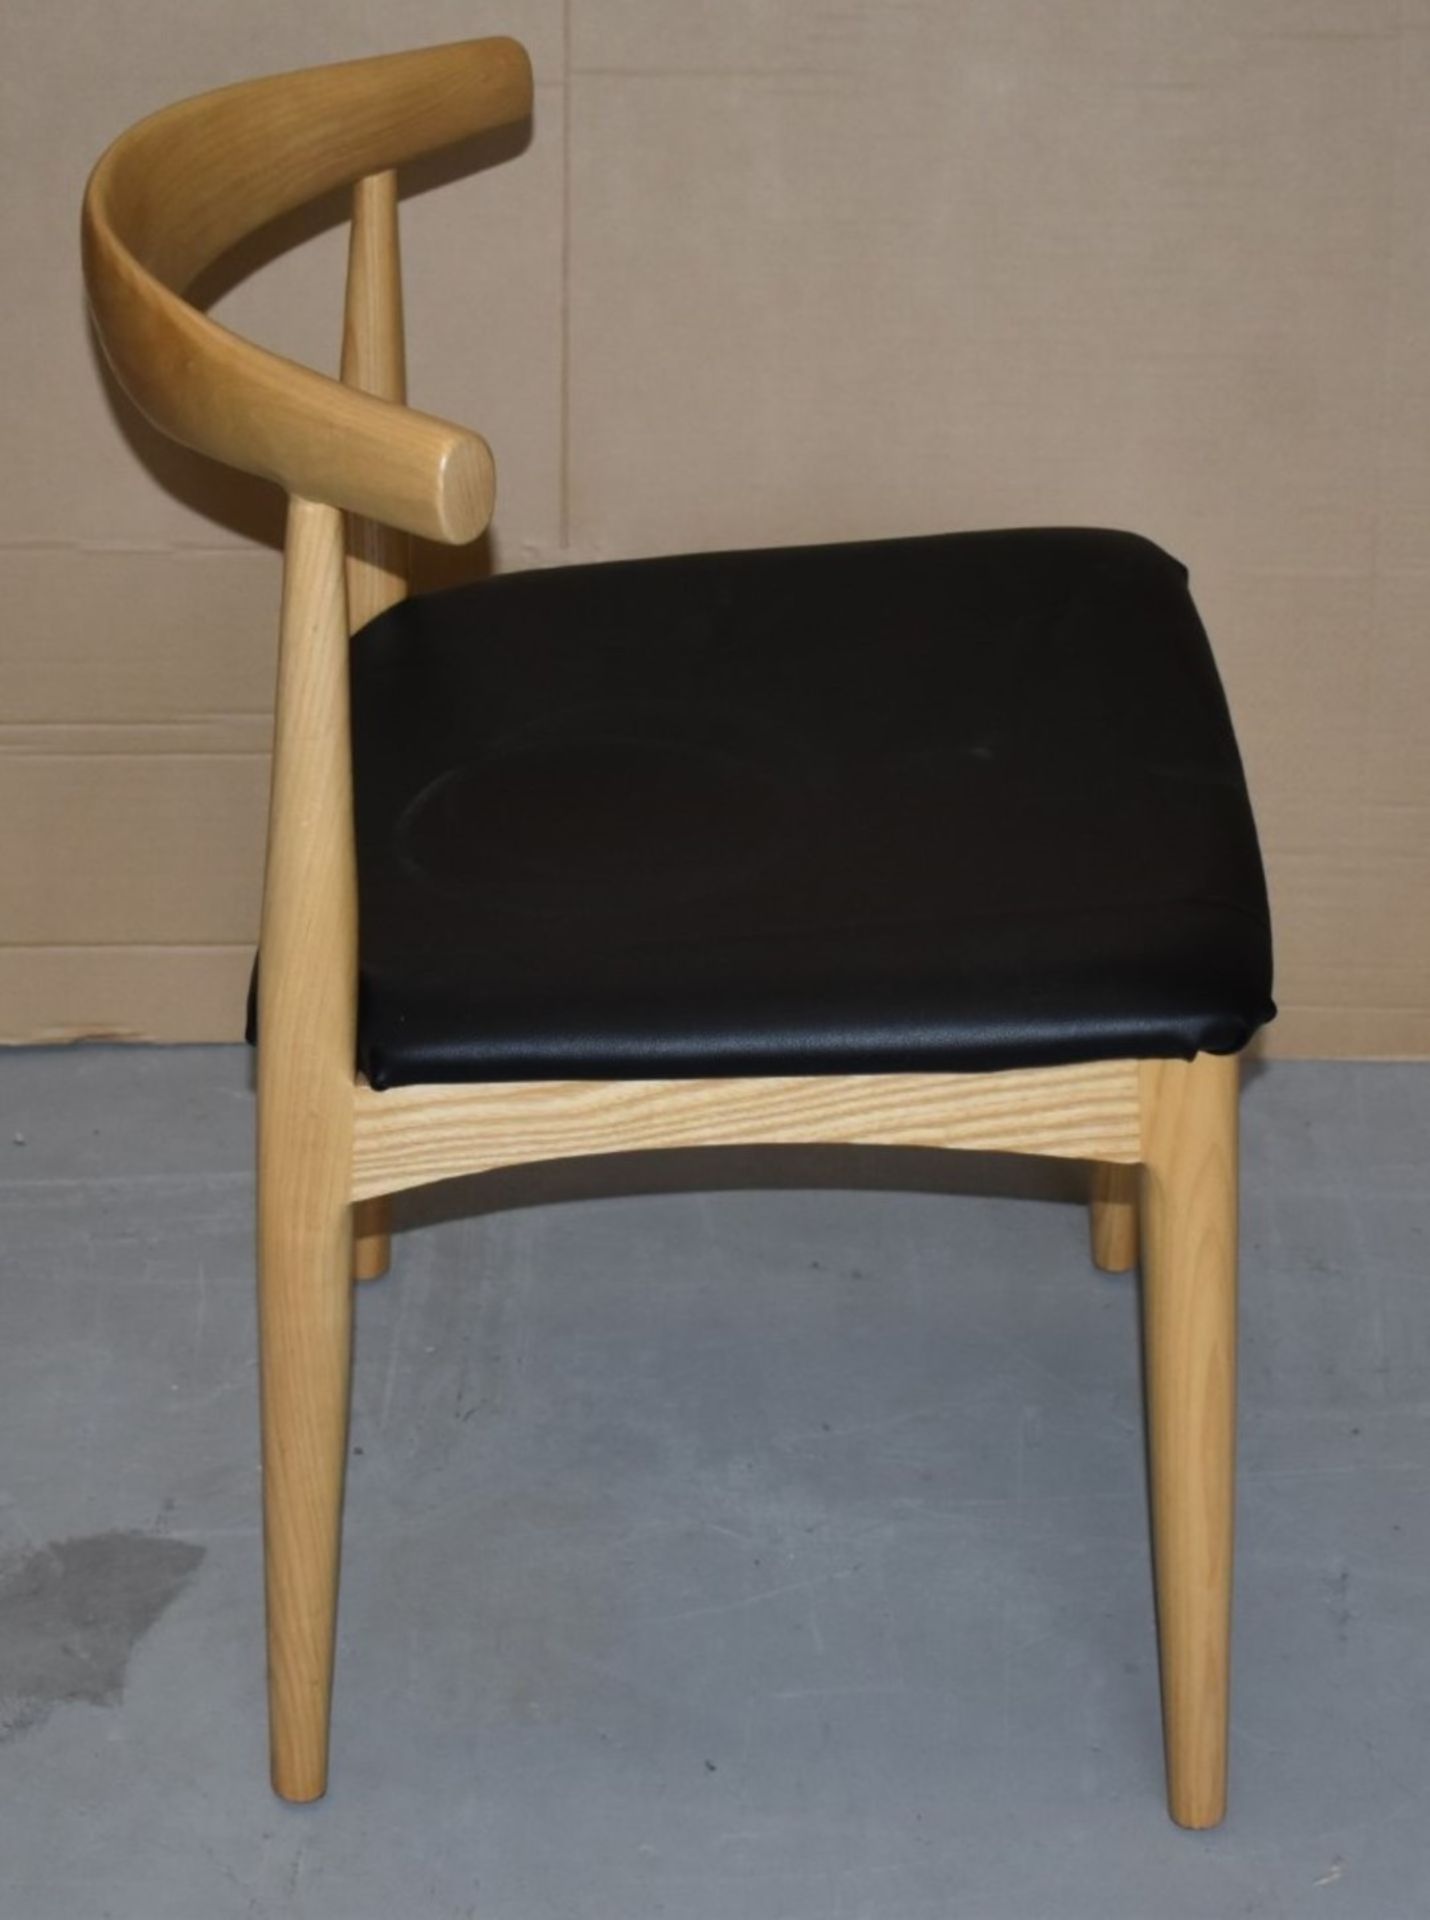 1 x Hans Wegner Inspired Elbow Chair - Solid Wood Chair With Light Stain Finish and Black Seat Pad - - Image 4 of 5